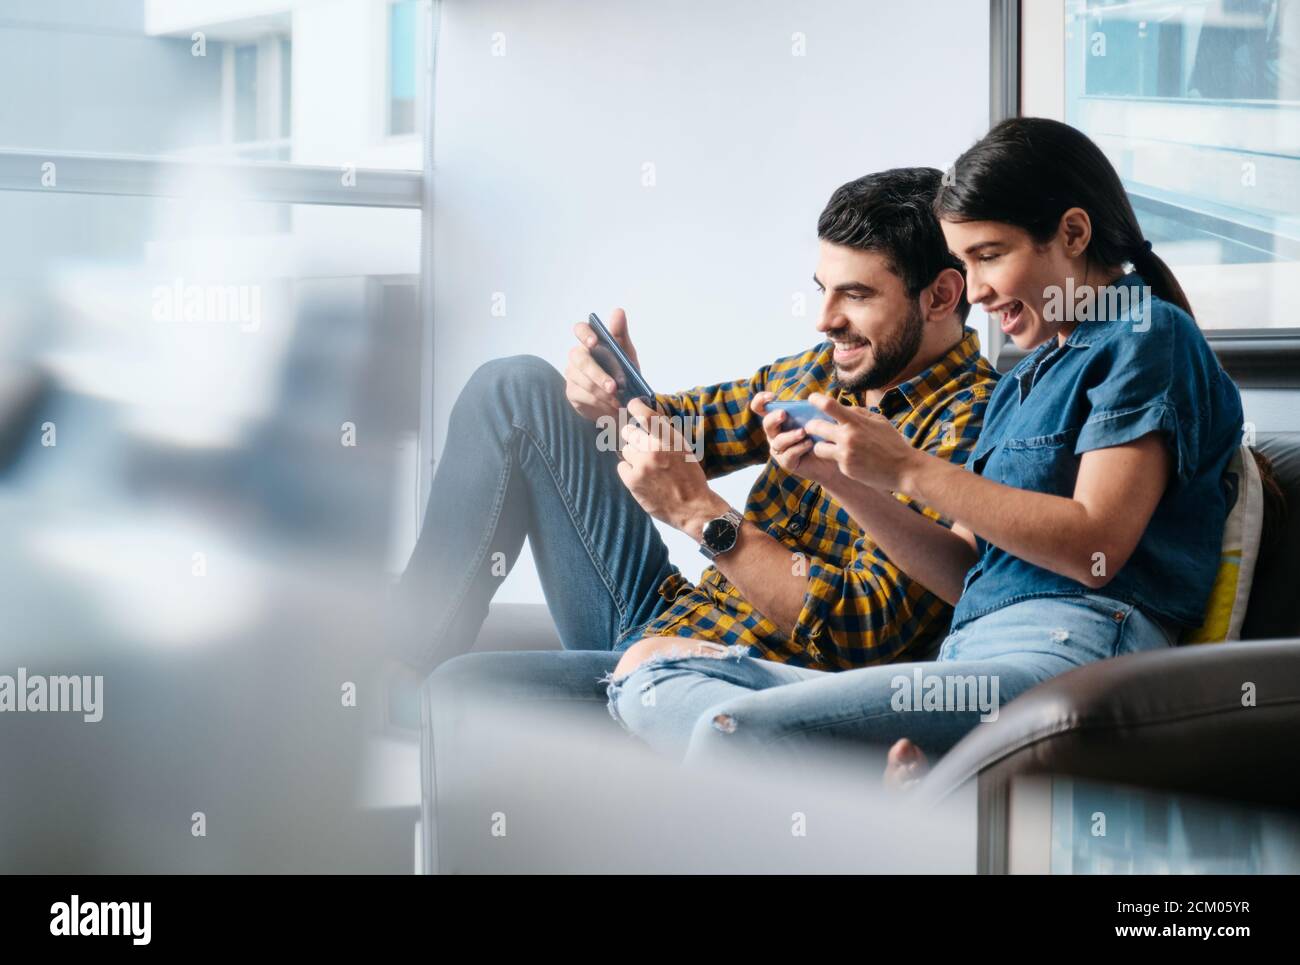 Happy People Playing Video Game With Smartphone And Laughing Stock Photo